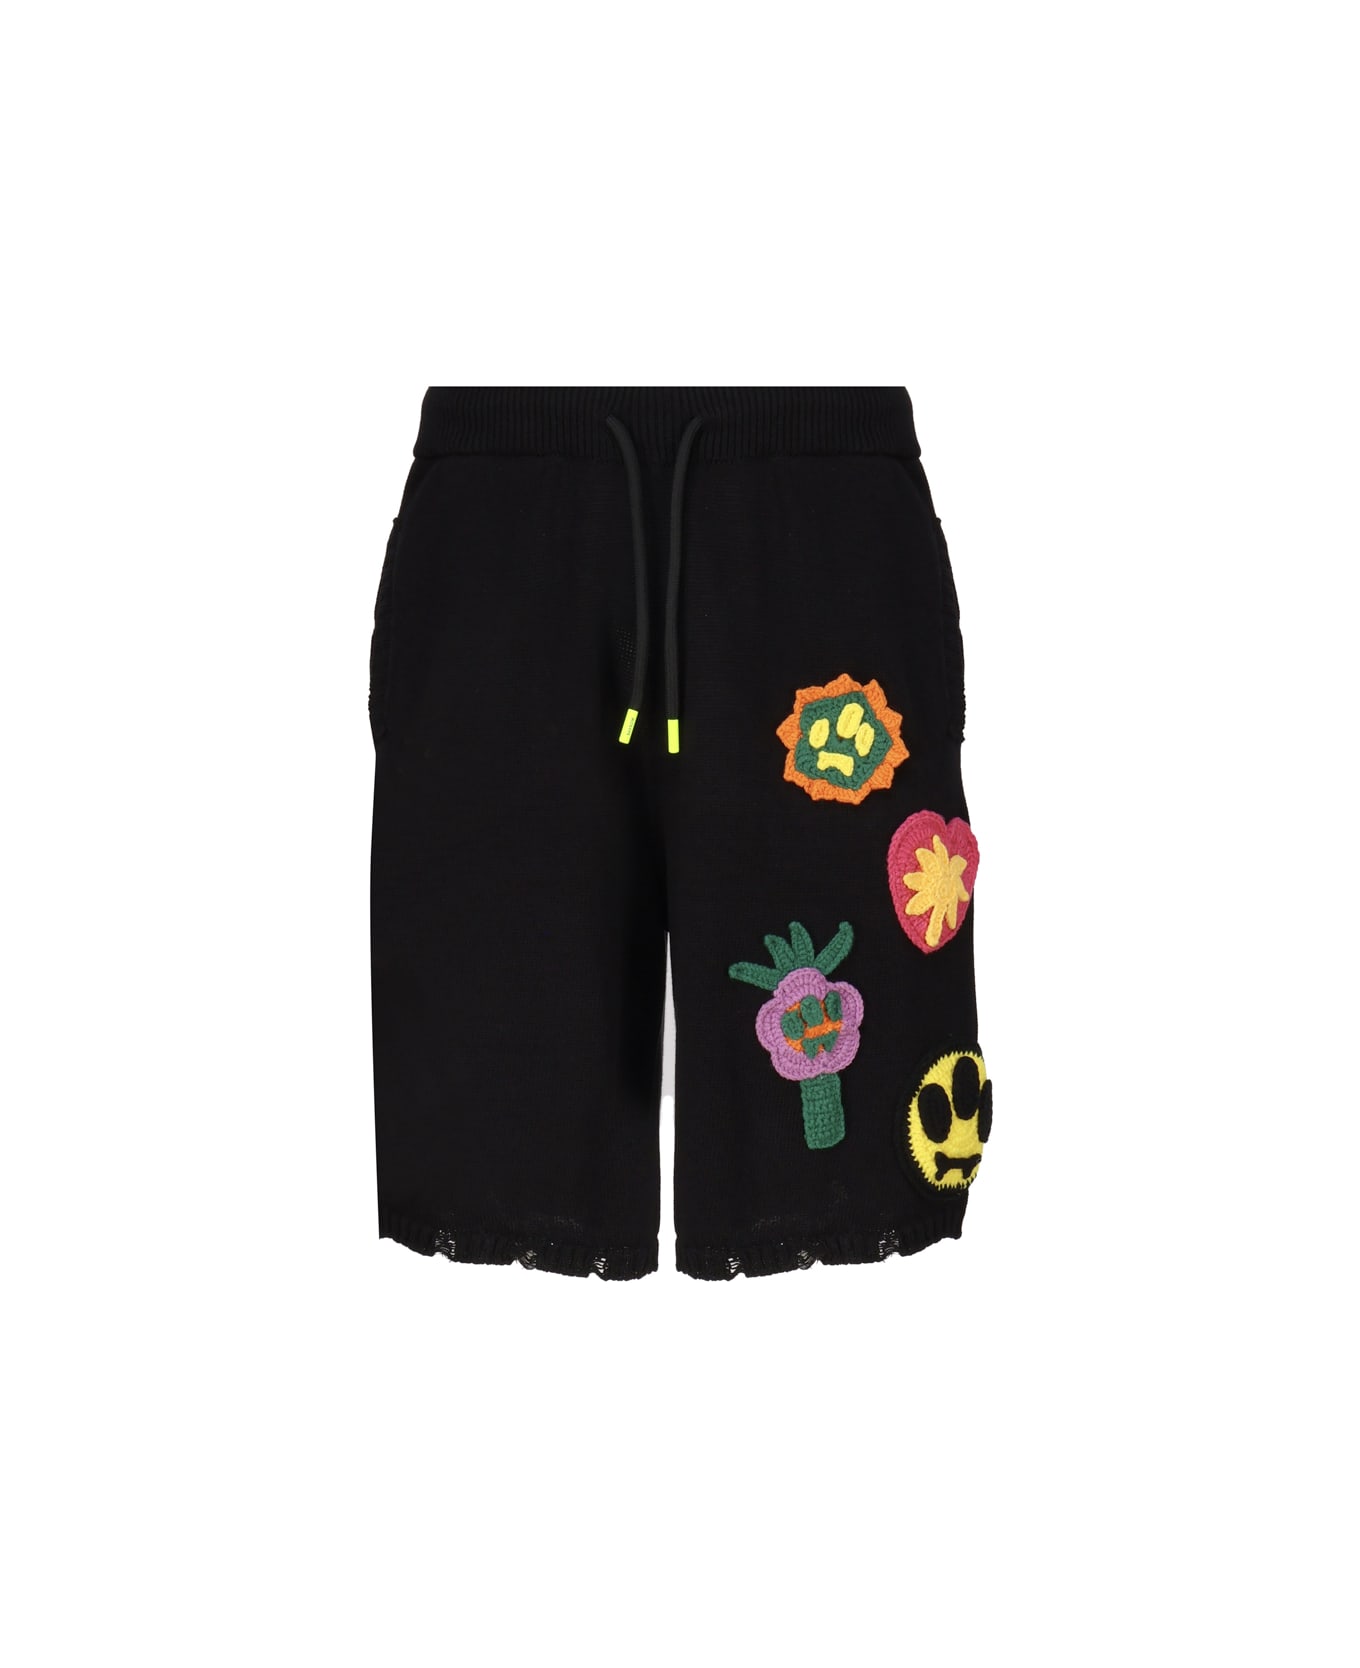 Barrow Bermuda Shorts With Patches - Black ウェア